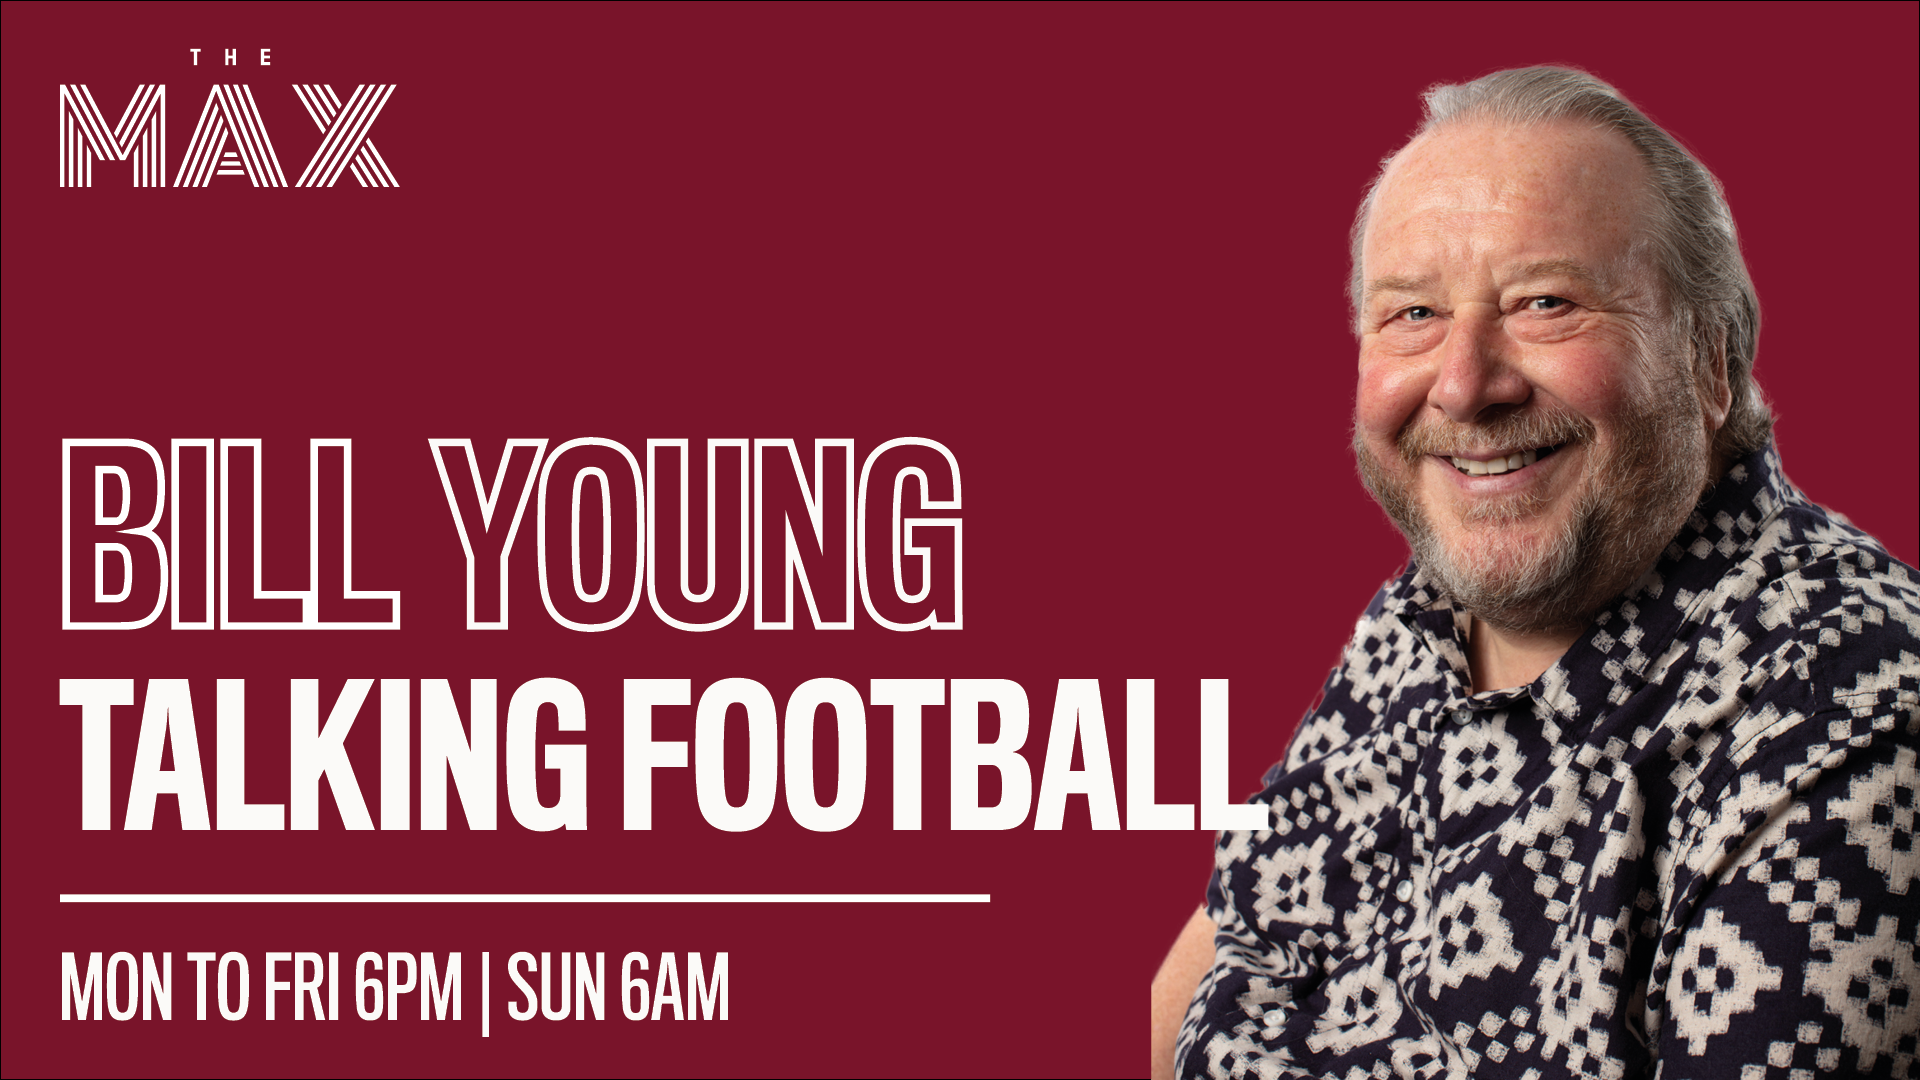 Talking Football with Bill Young - Thursday 1st April